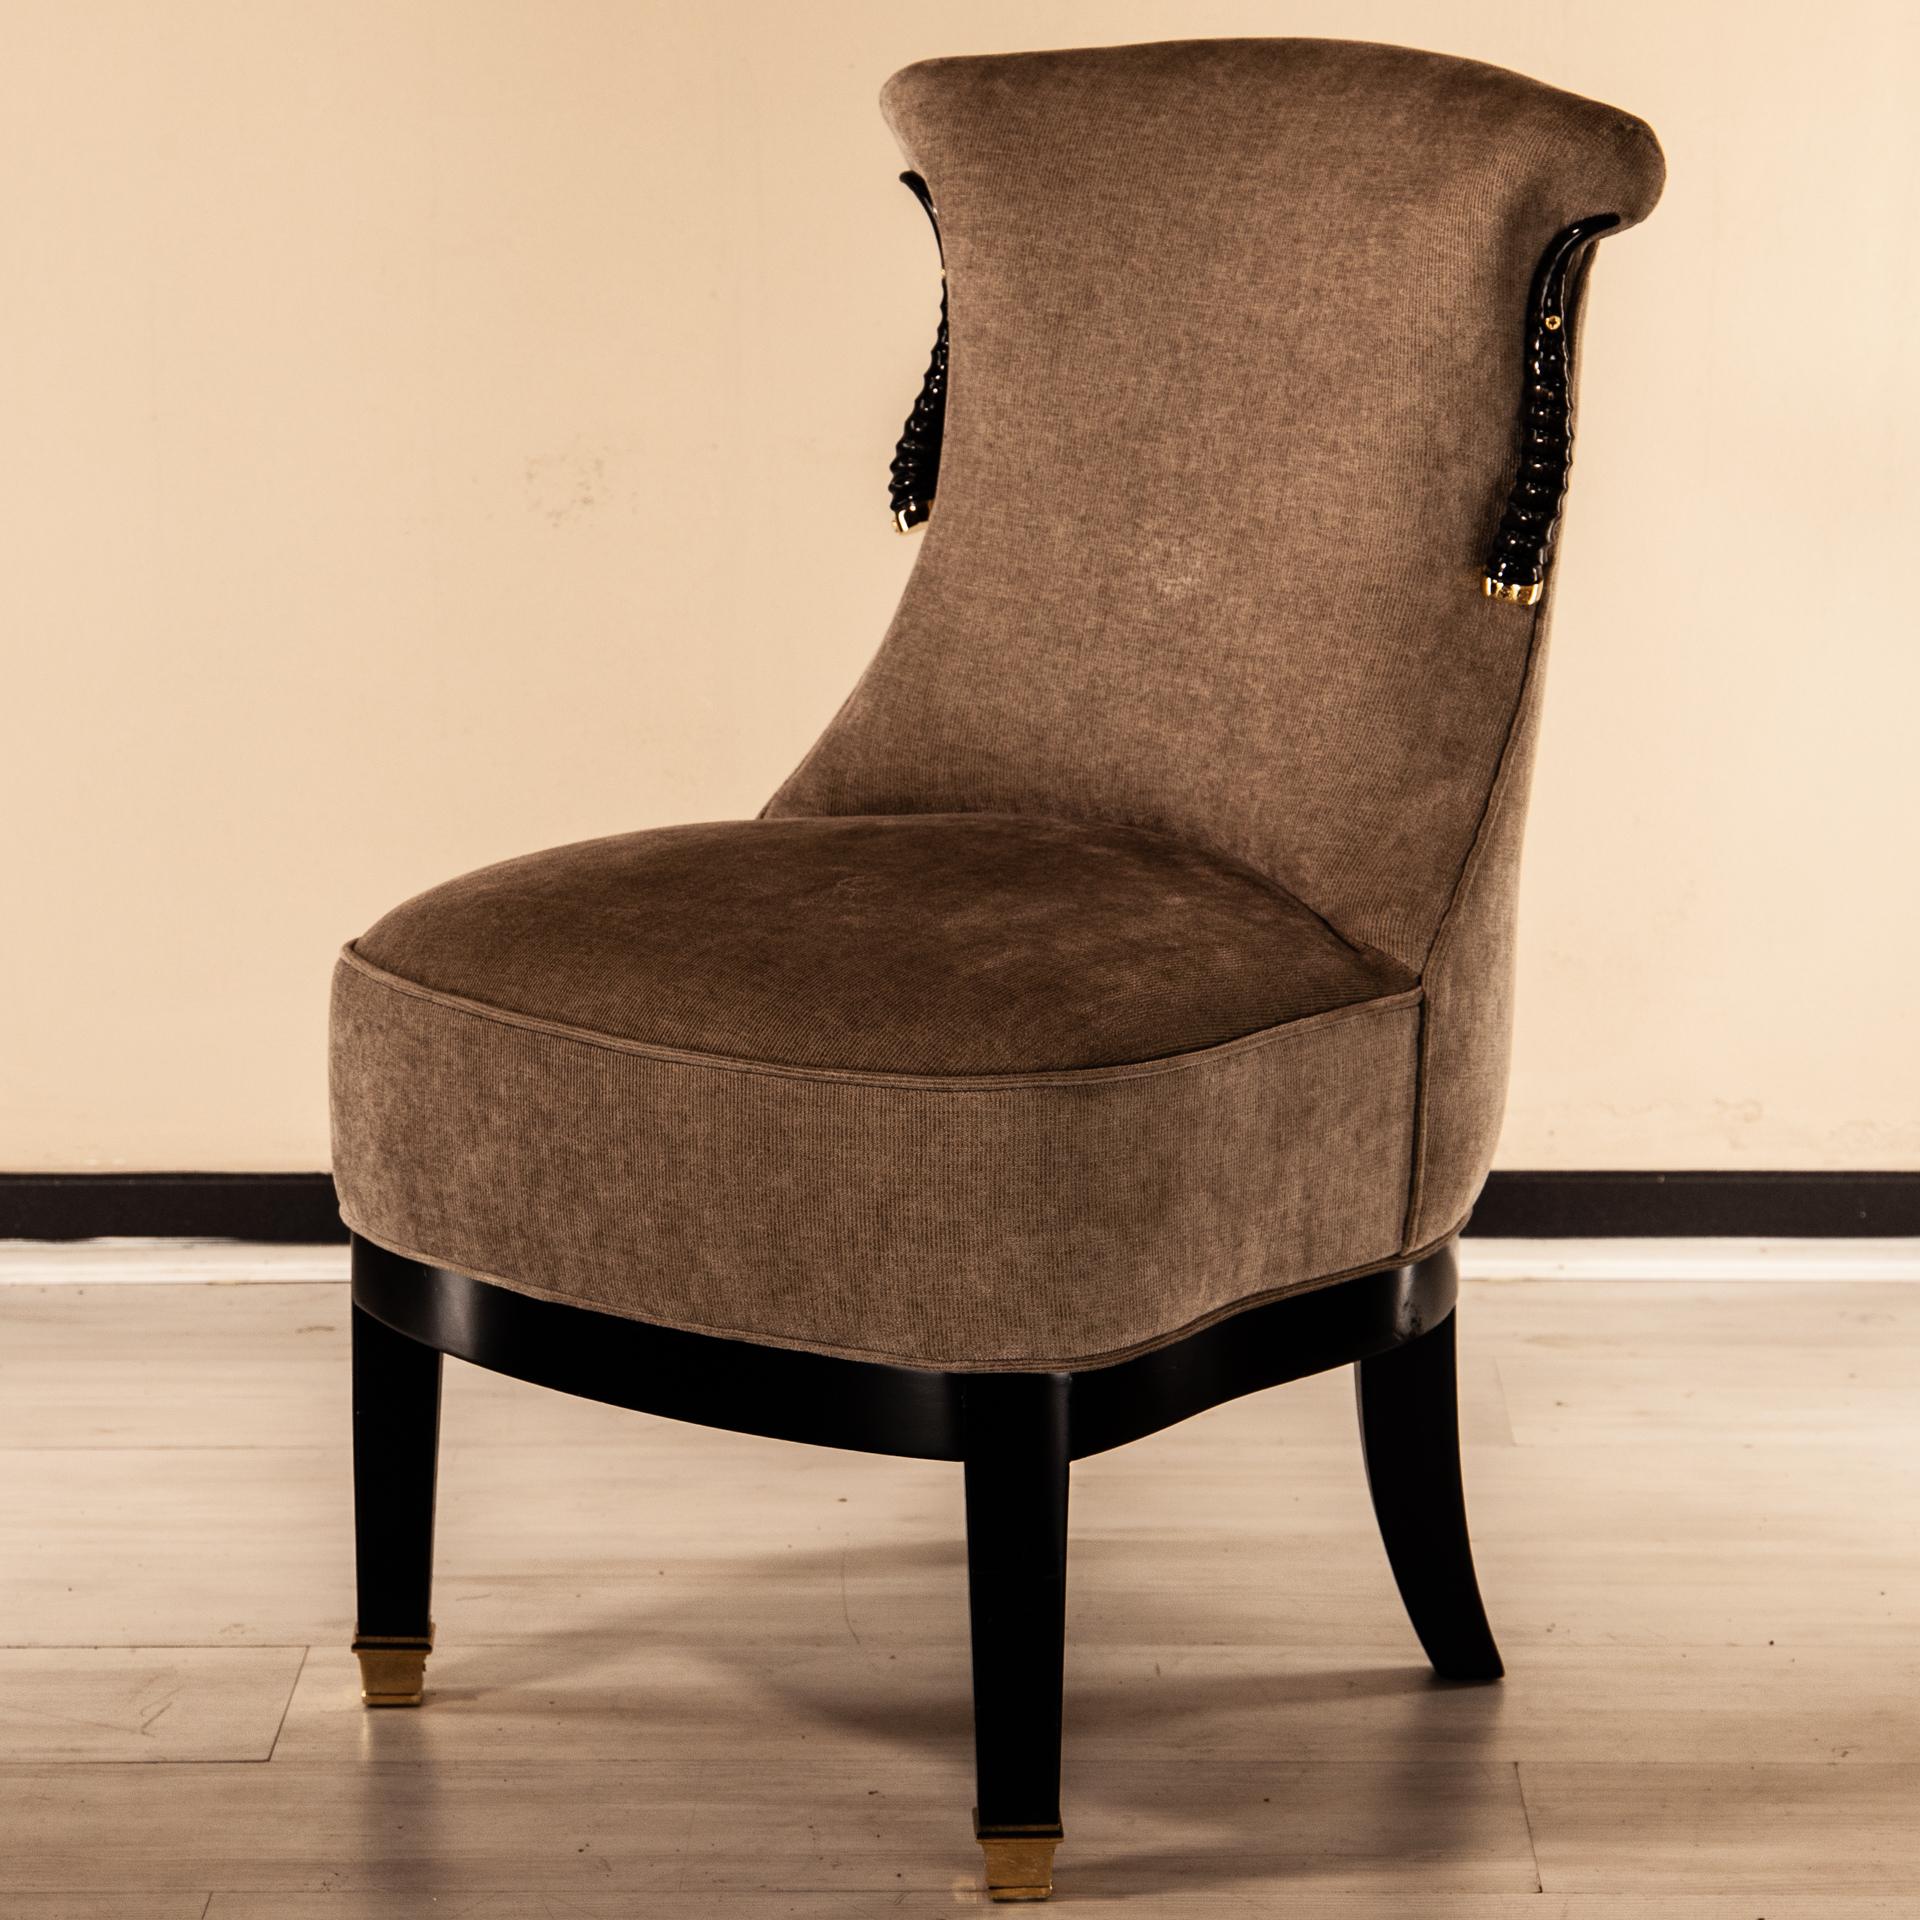 Small Upholstered Chair Gazzella, Natural Horn, Solid Brass Finials and Details For Sale 10